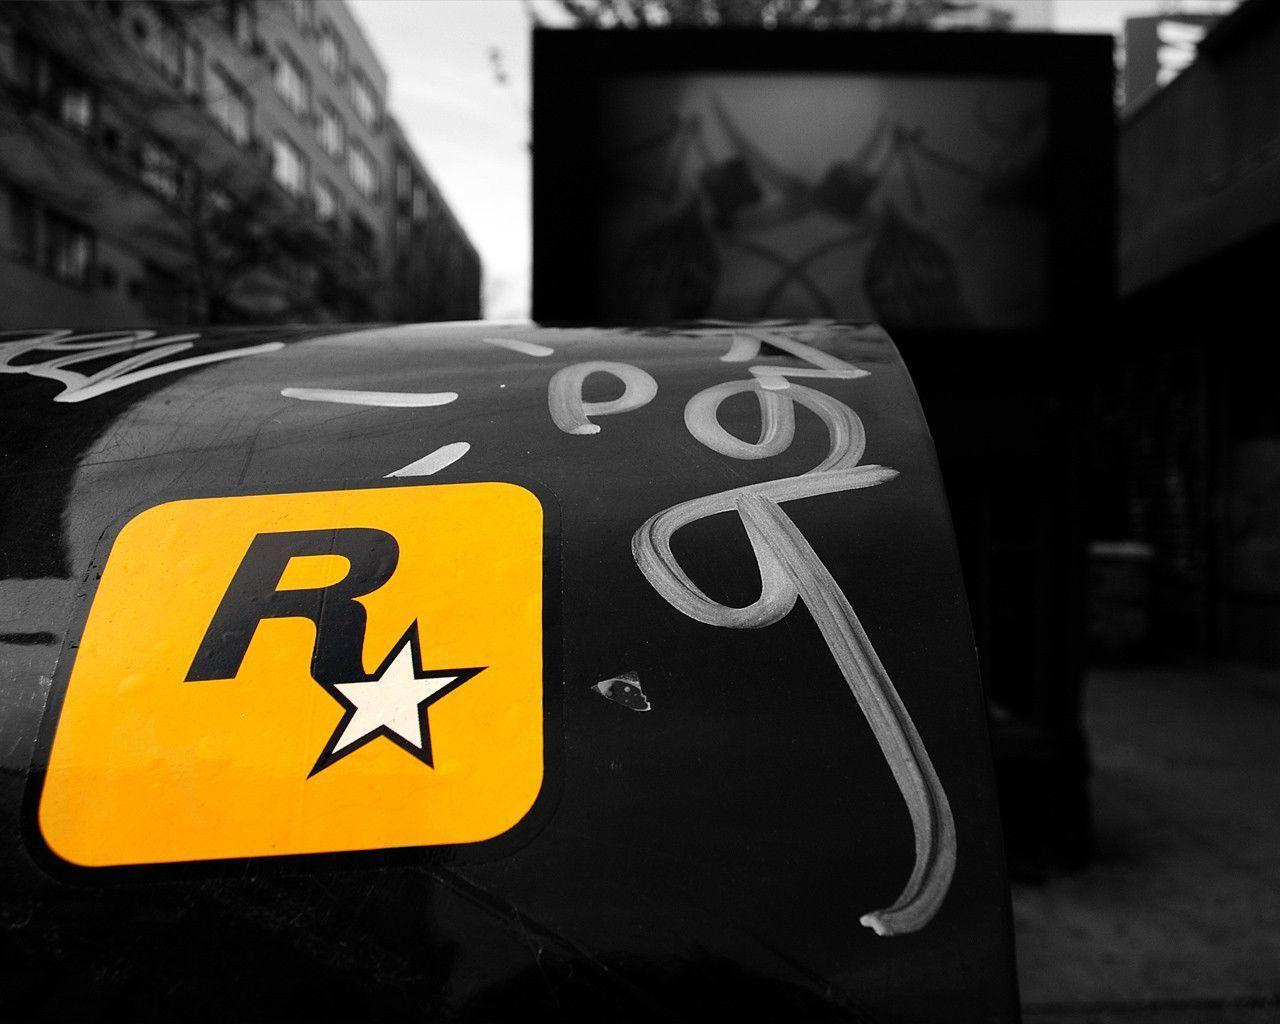 Download: Rockstar HD wallpapers collection